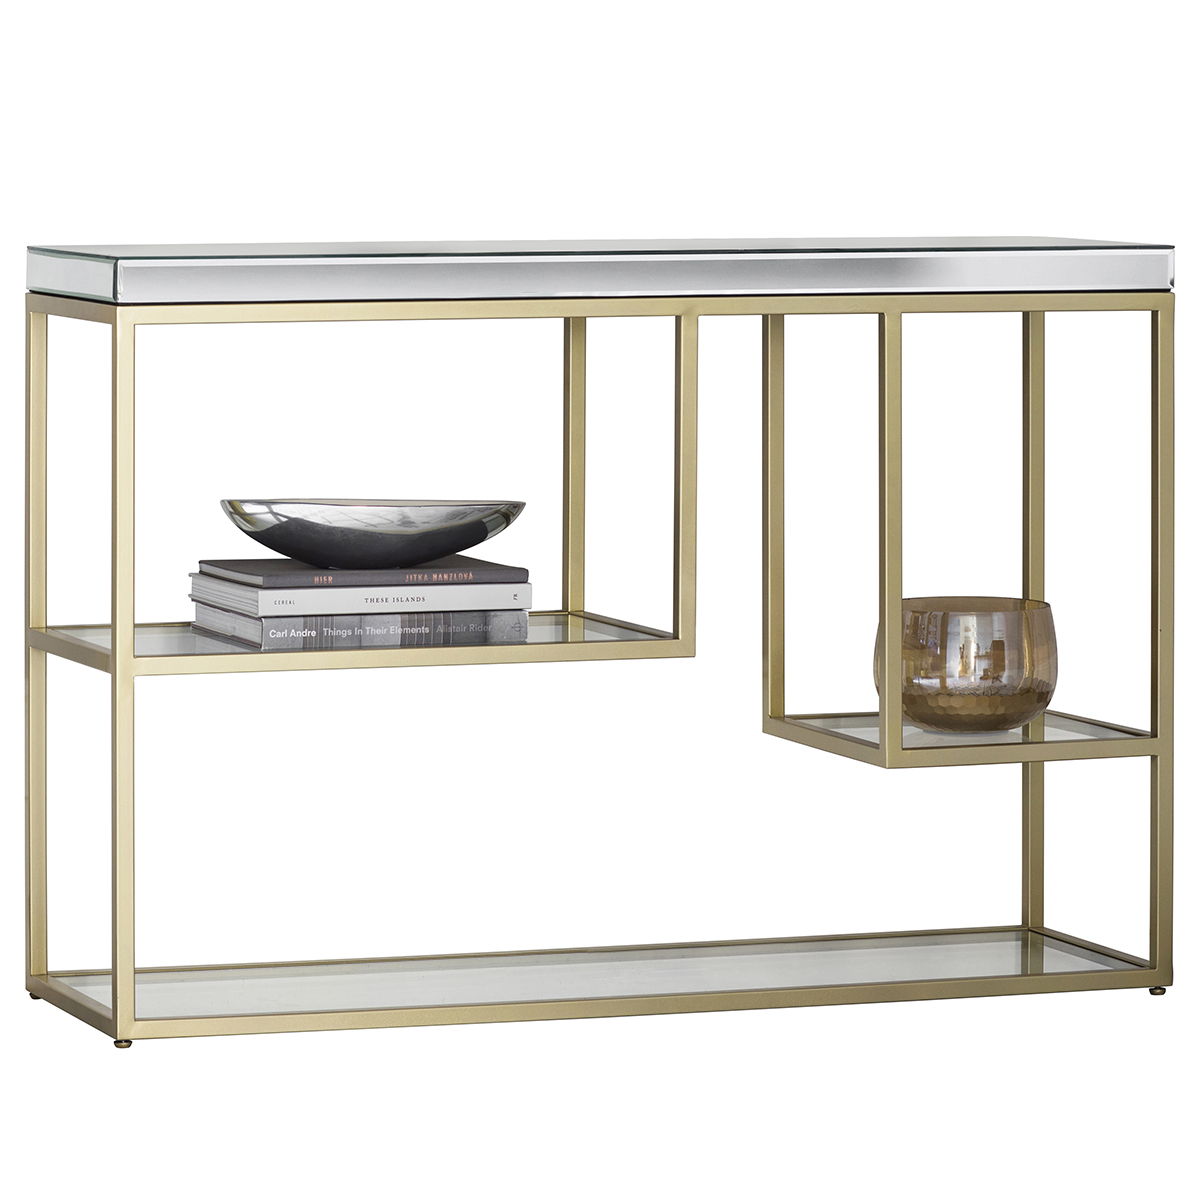 Gallery Direct Pippard Console Table Champagne